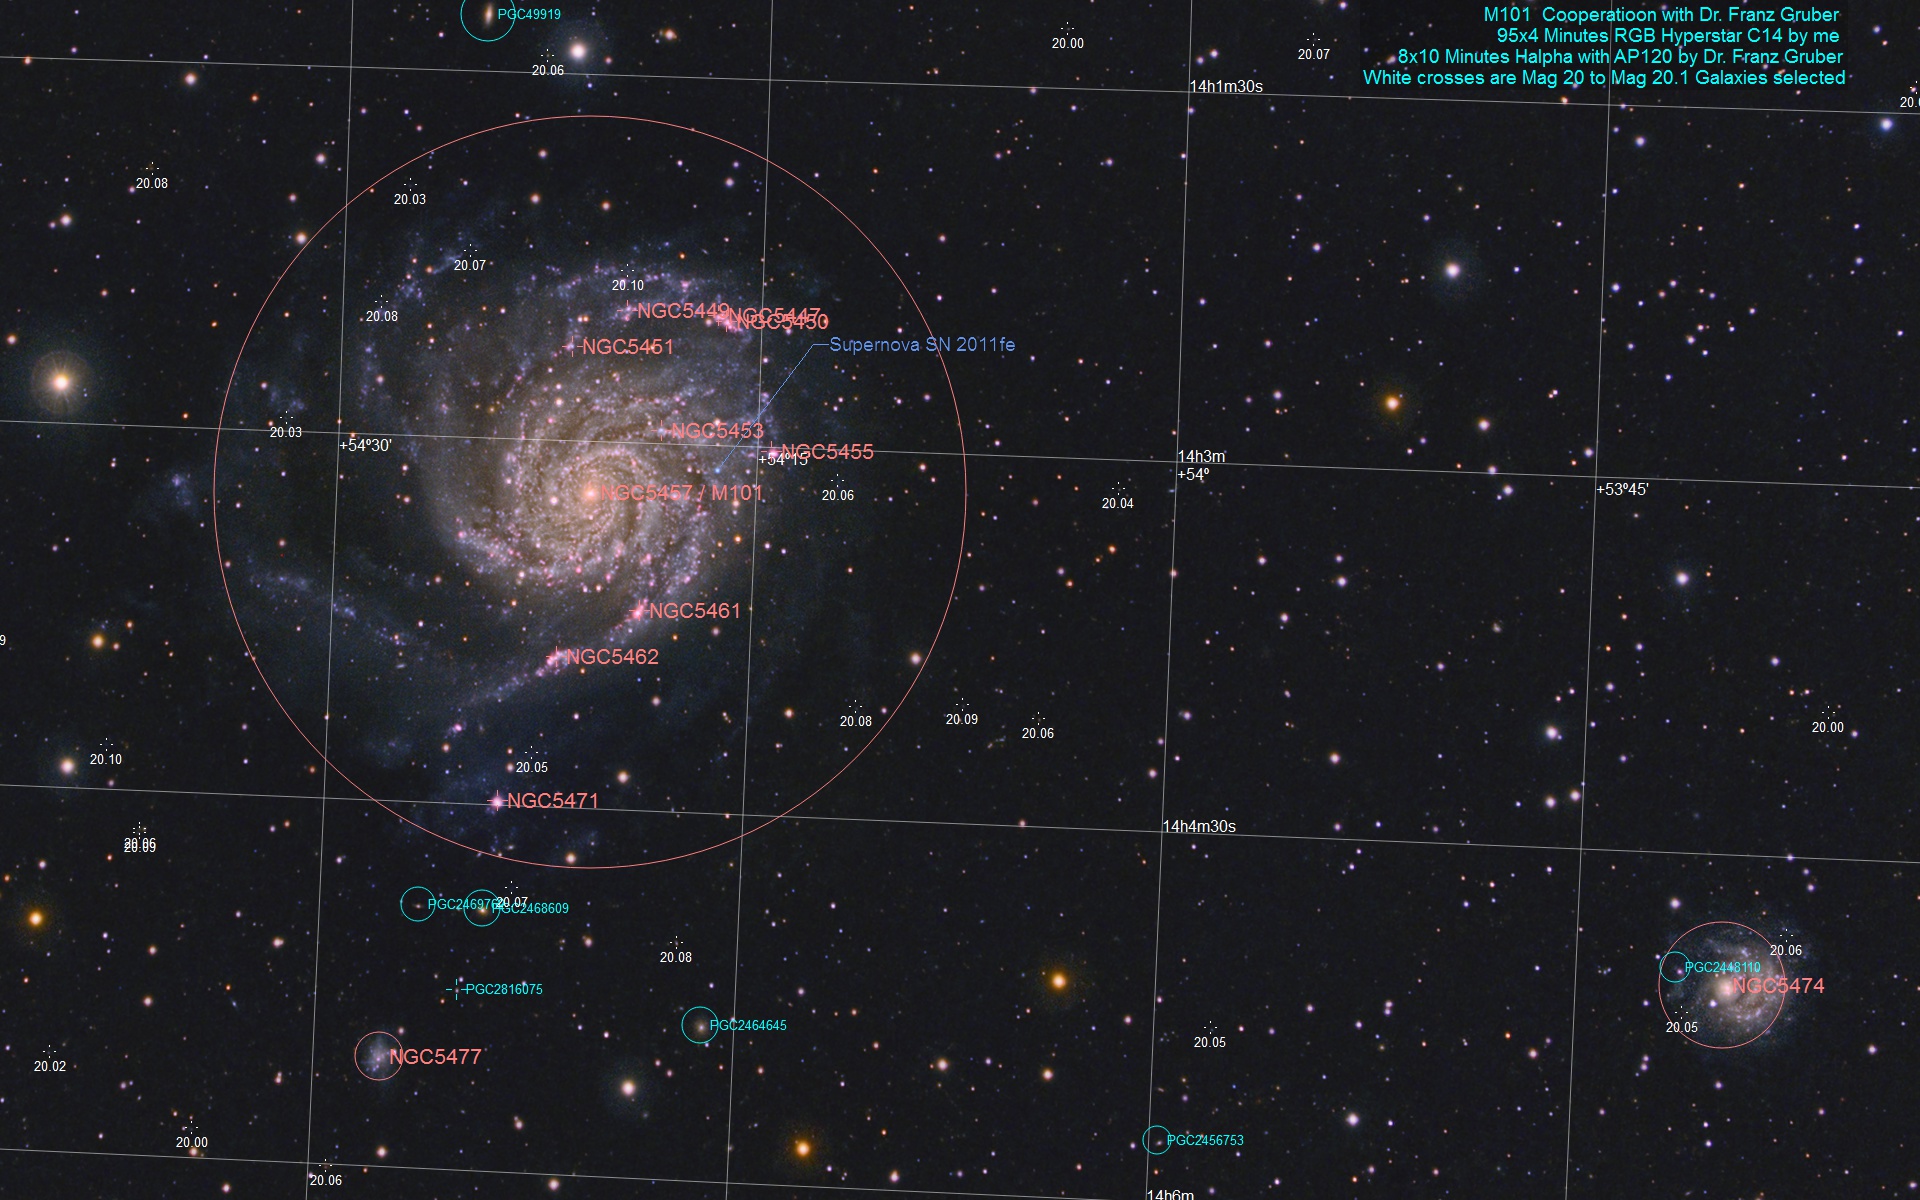 For Galaxies without Annotation click on Image